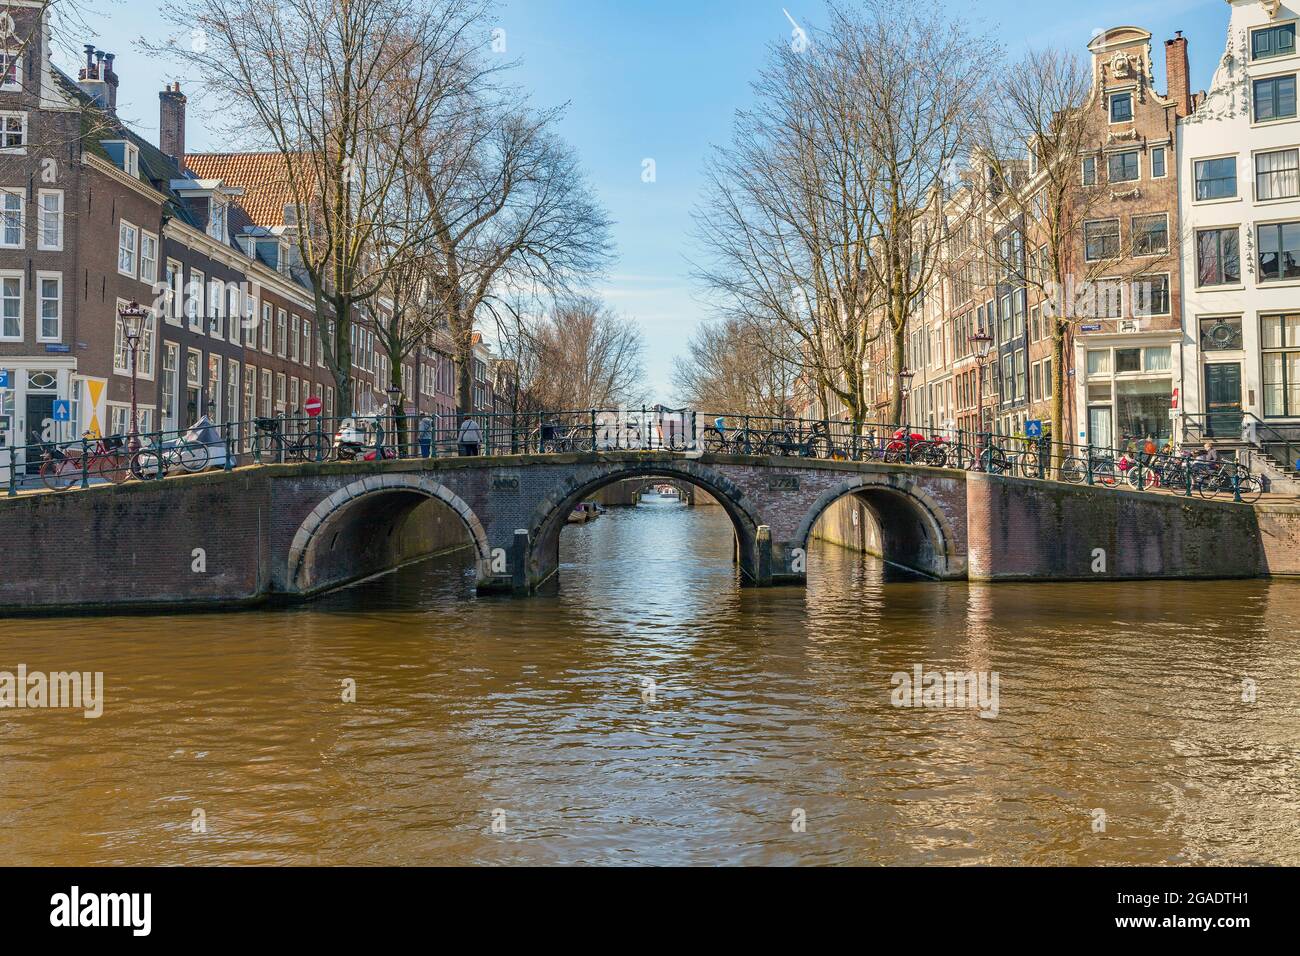 Bridge with arches, Herengracht and Leidsegracht canals, Amsterdam Stock Photo